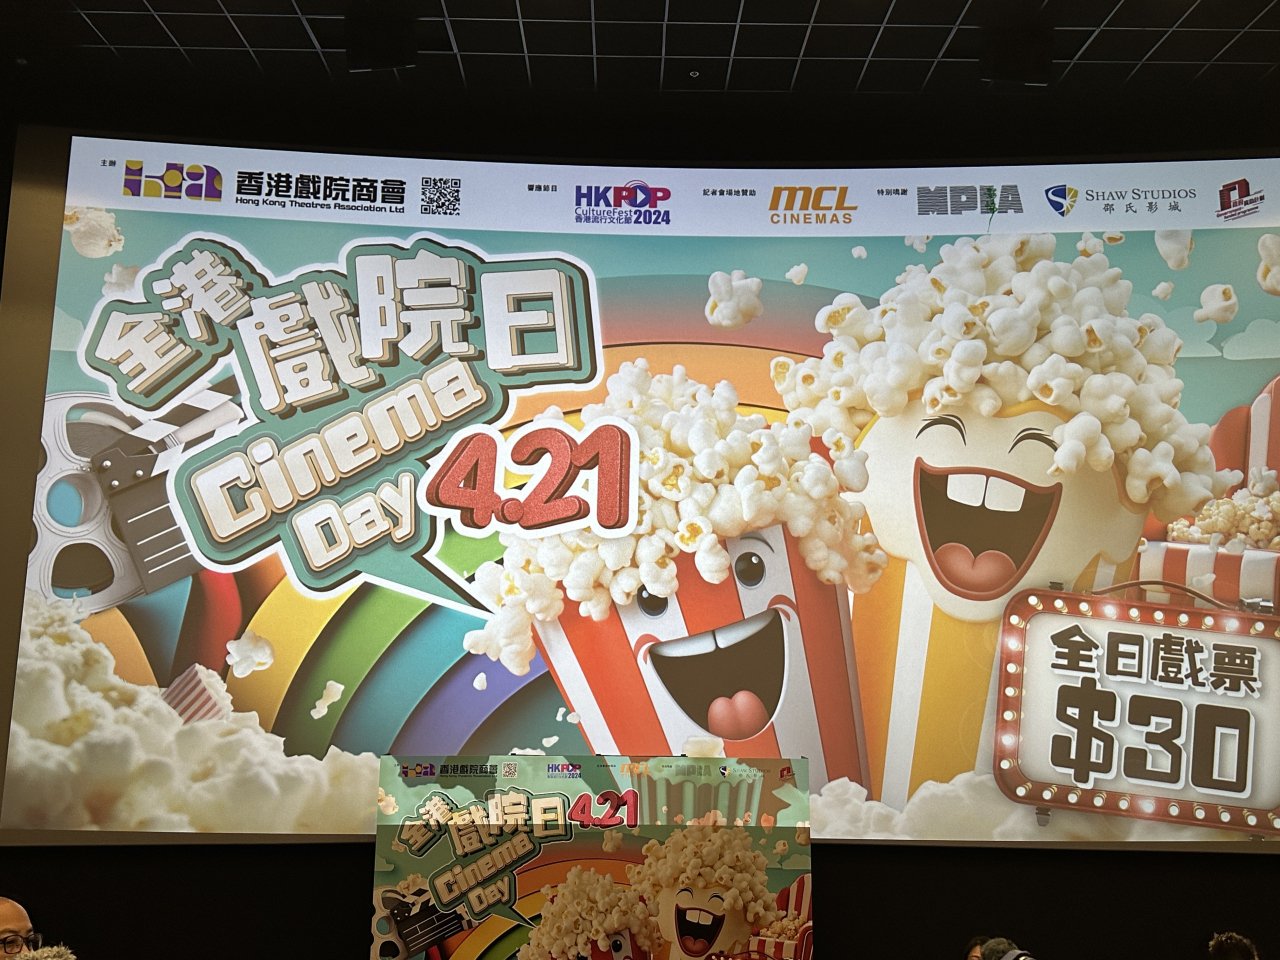 'Cinema Day' promises cheap moviegoing fun for fans